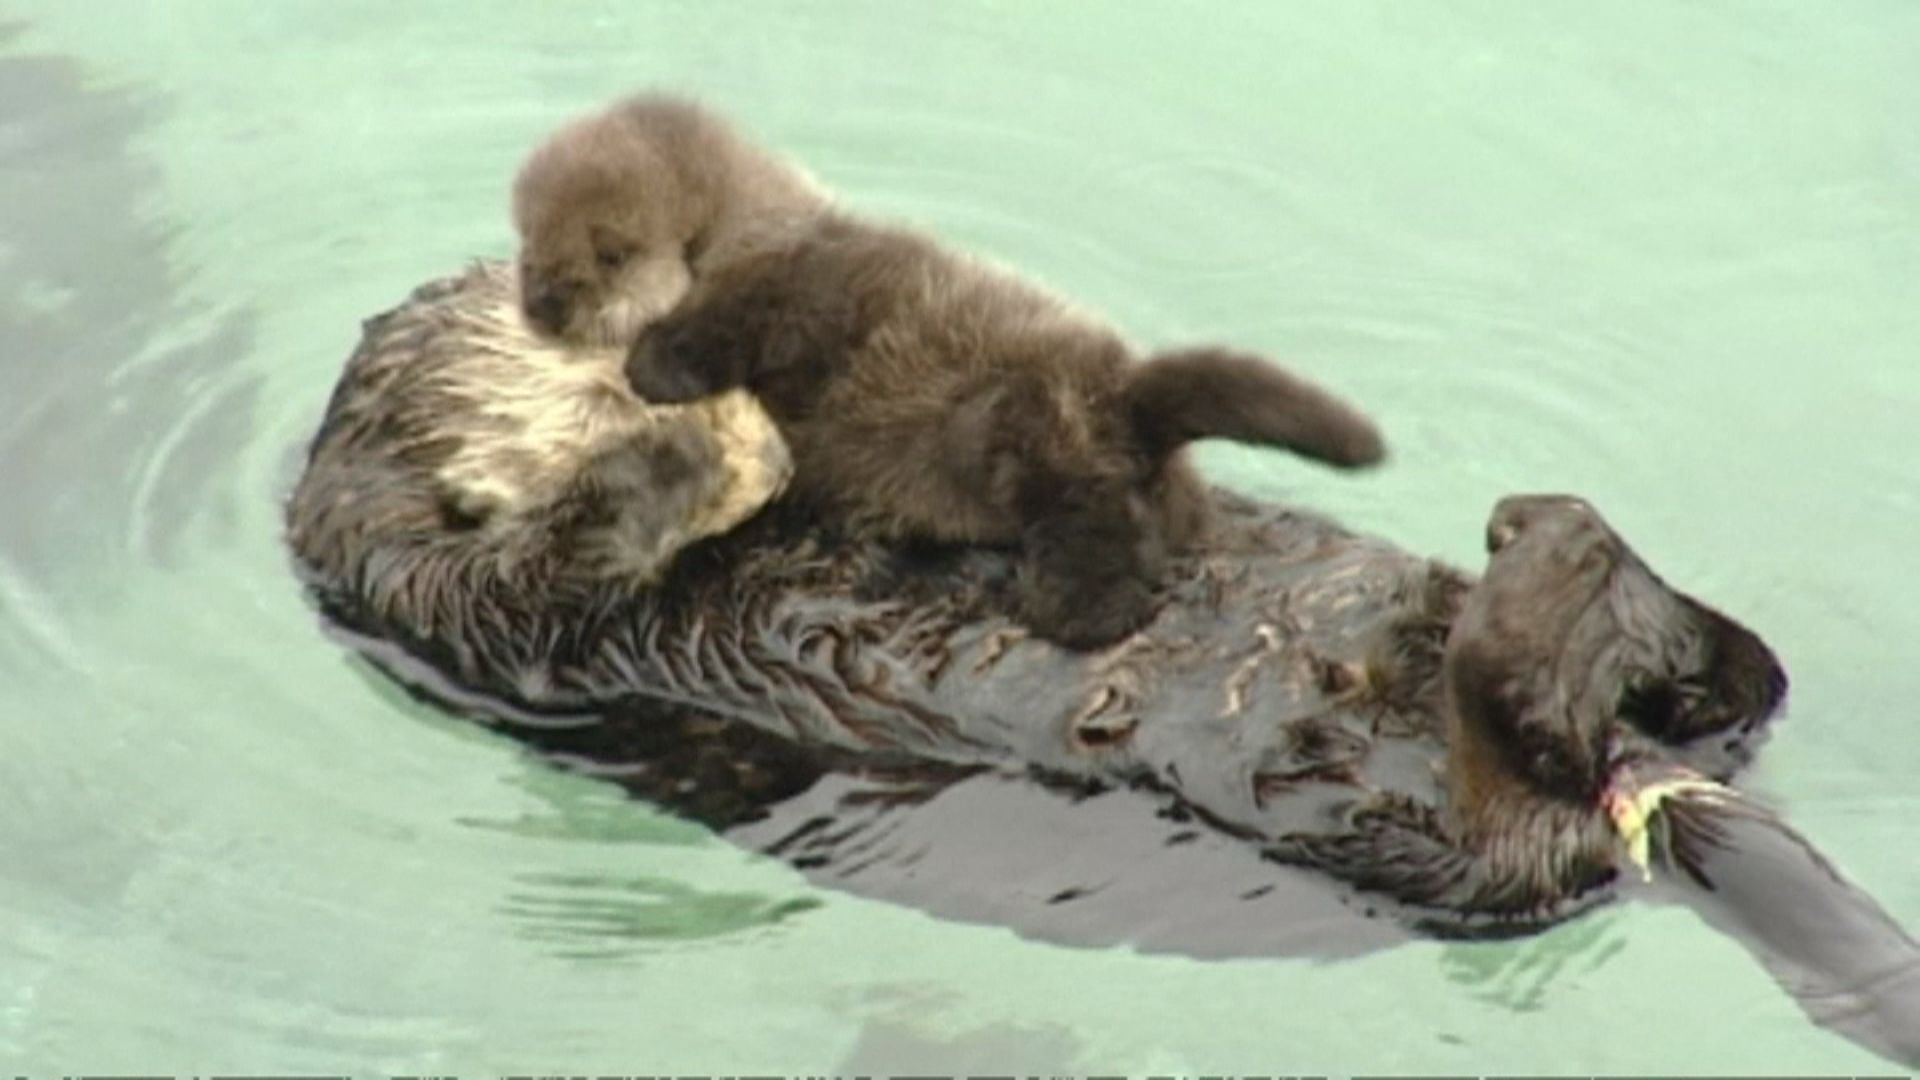 You 'otter' get a look at this cute baby otter